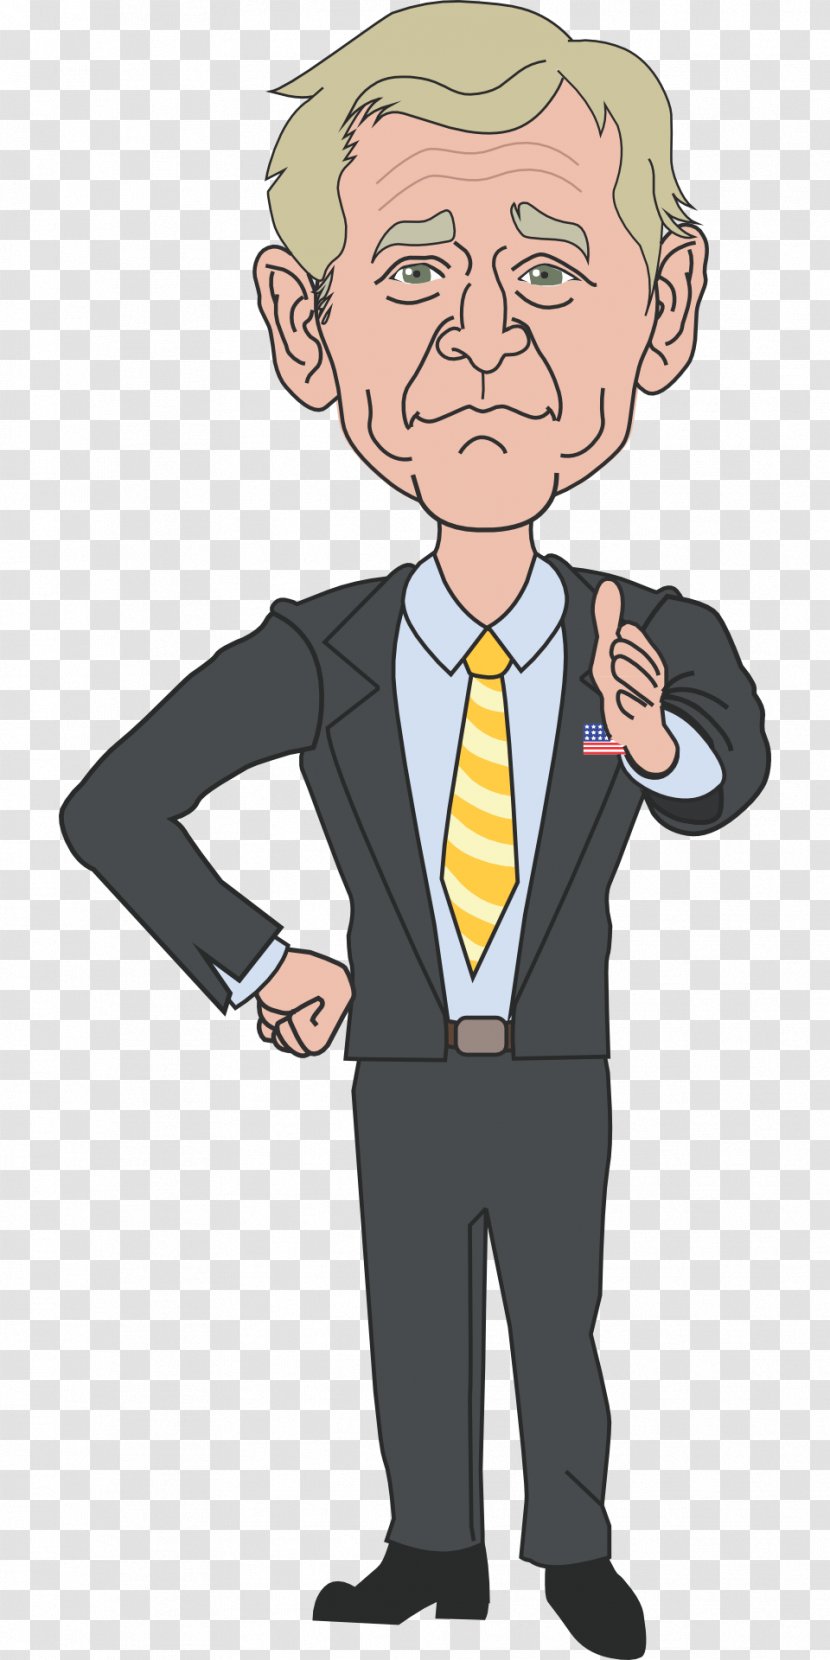 George W. Bush President Of The United States Clip Art - Organization Transparent PNG